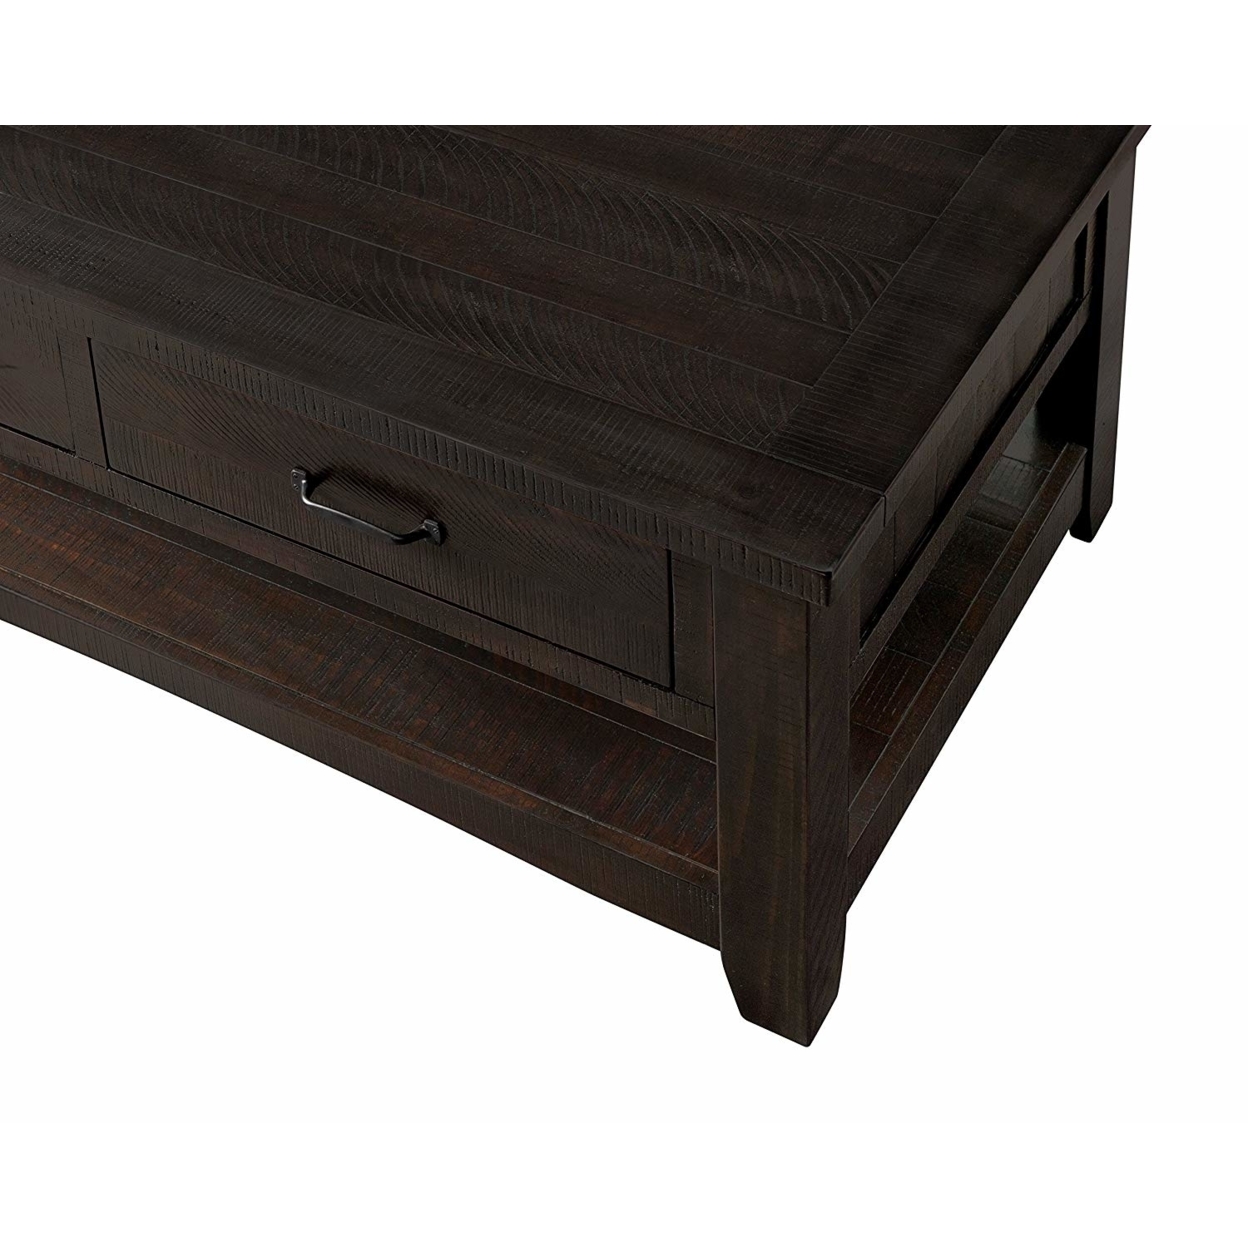 Wooden Coffee Table With Two Drawers, Espresso Brown- Saltoro Sherpi